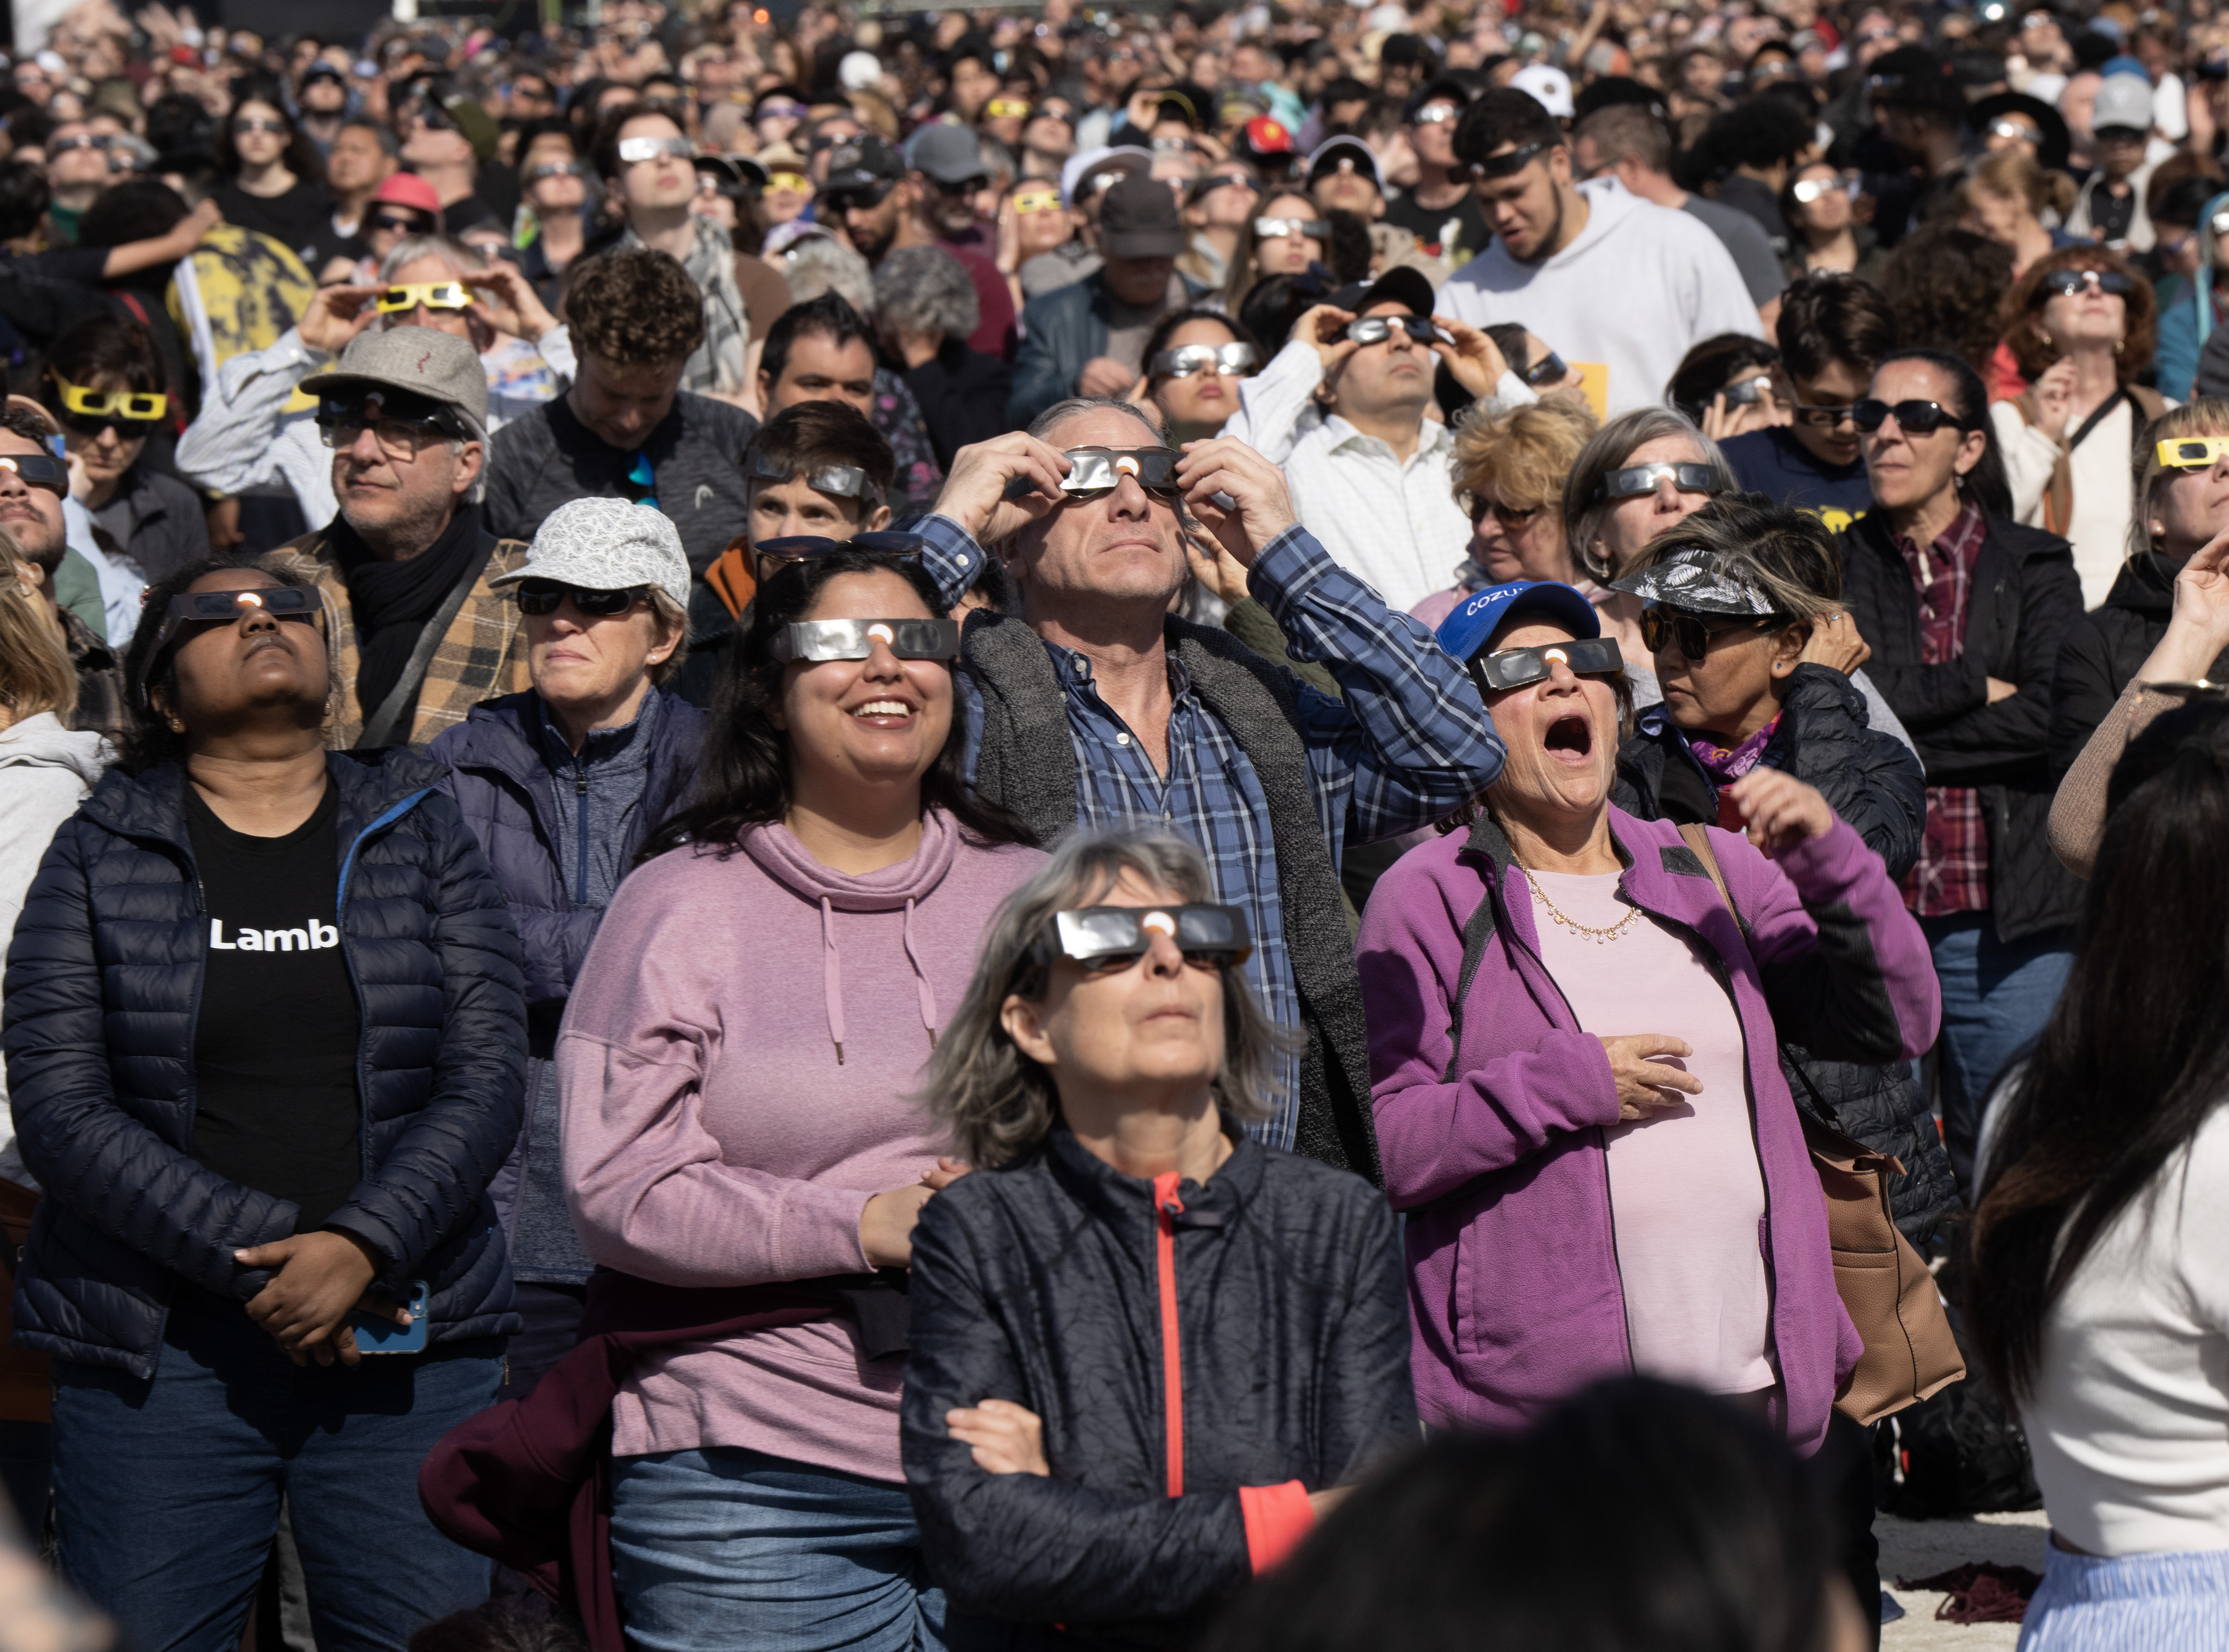 Enjoyed the solar eclipse? Here’s when and where it is happening next